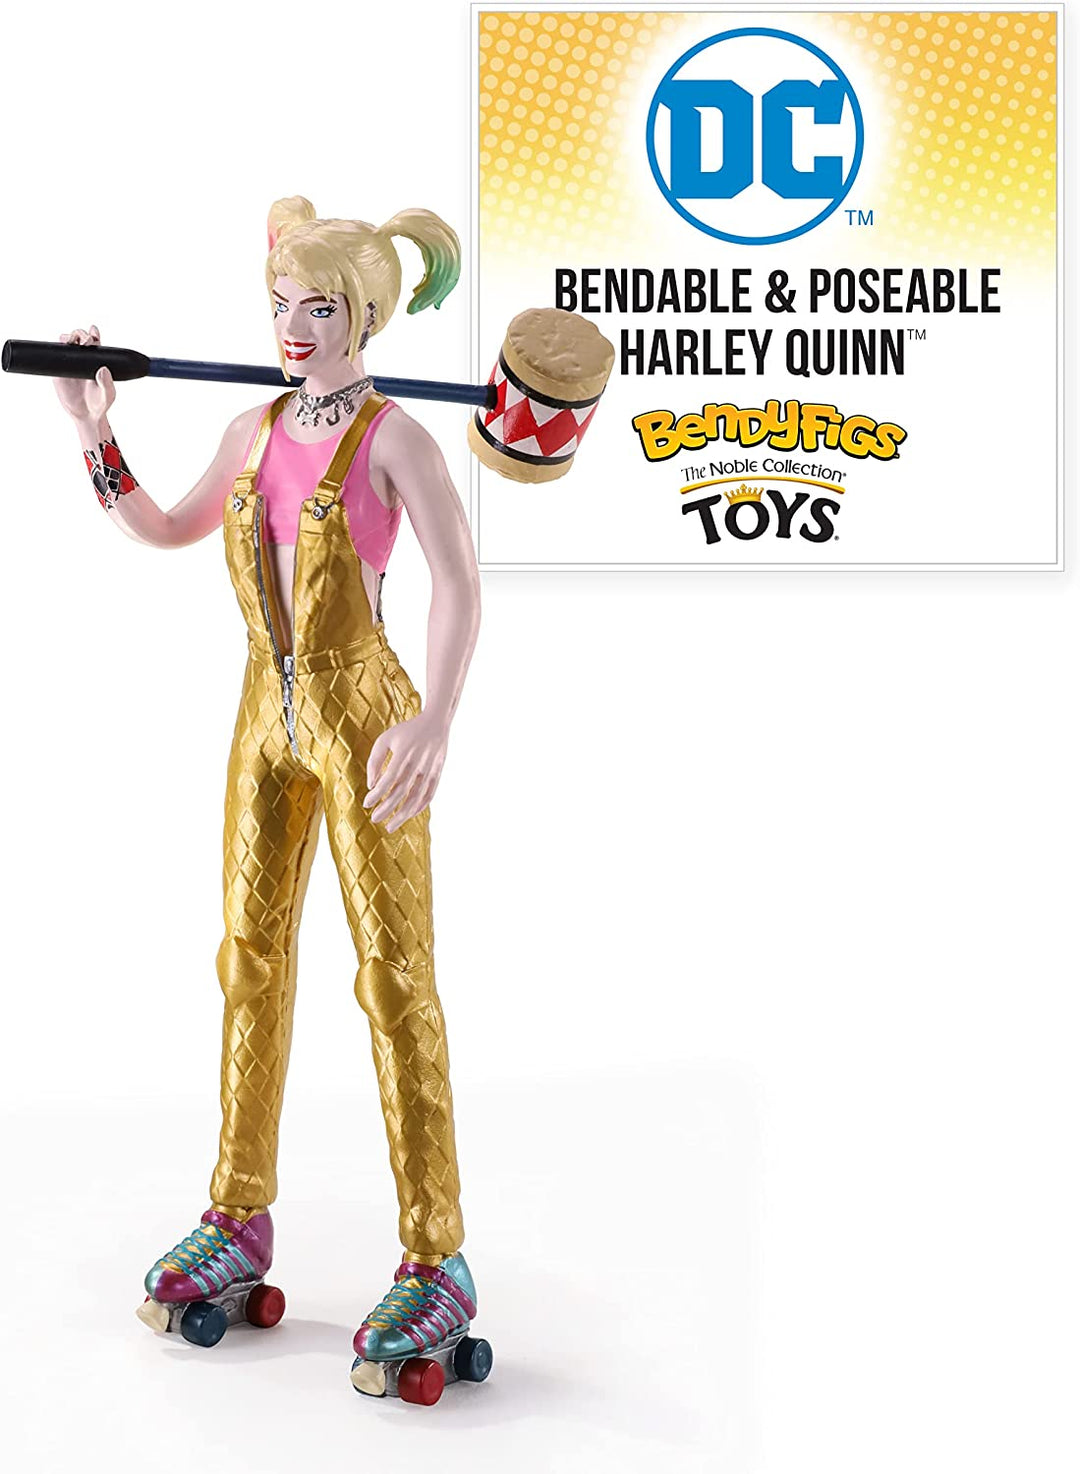 The Noble Collection DC Comics Bendyfigs Harley Quinn - 7.5in (19cm) Noble Toys Bendable Posable Collectible Doll Figure With Stand